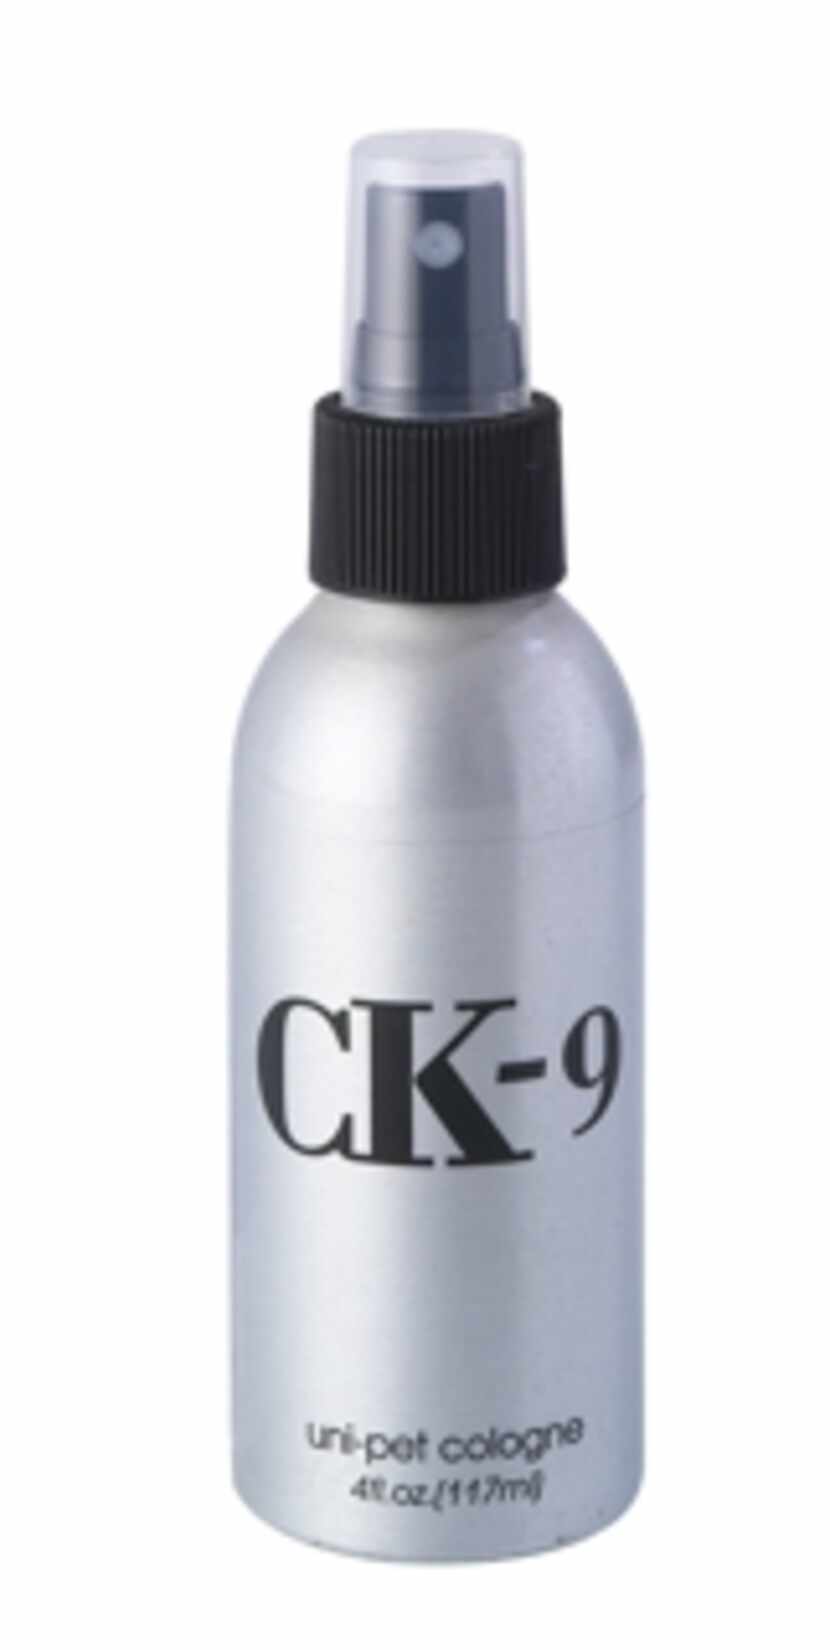 
Dallas company Nature Labs offers CK-9, which is a pet-friendly spray inspired by Calvin...